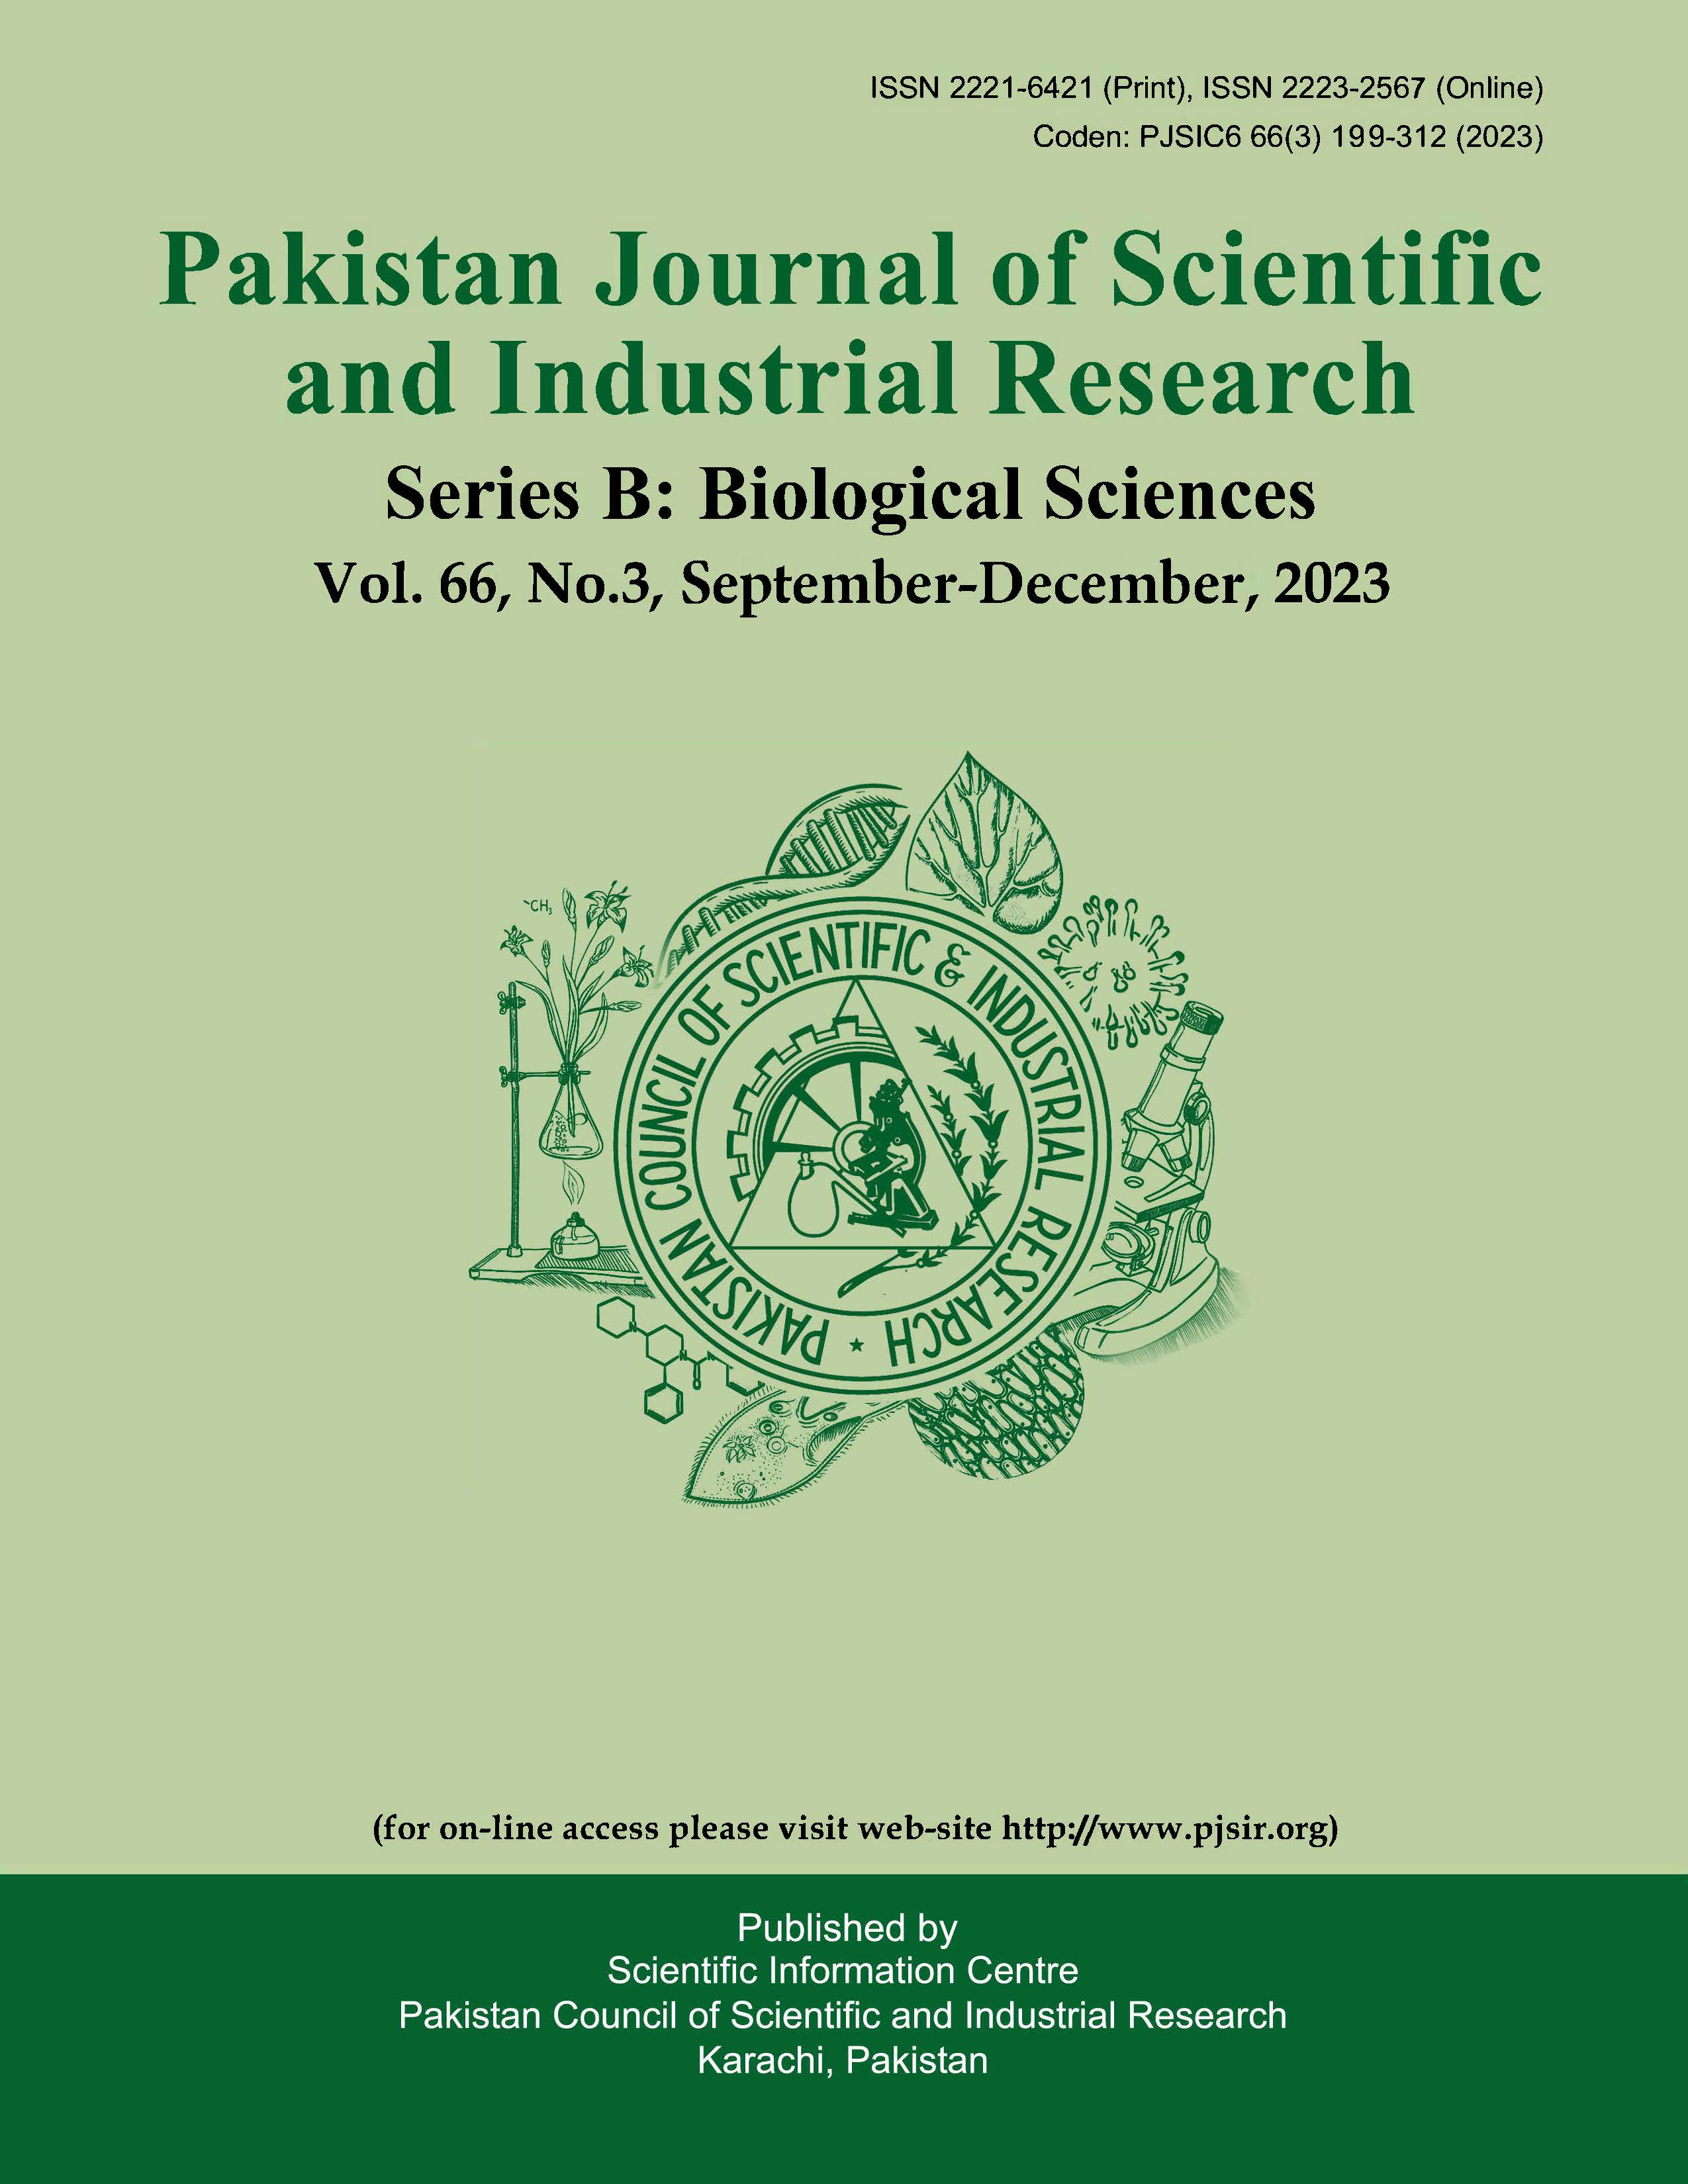 					View Vol. 66 No. 3 (2023): Pakistan Journal of Scientific and Industrial Research Series B: Biological Sciences
				